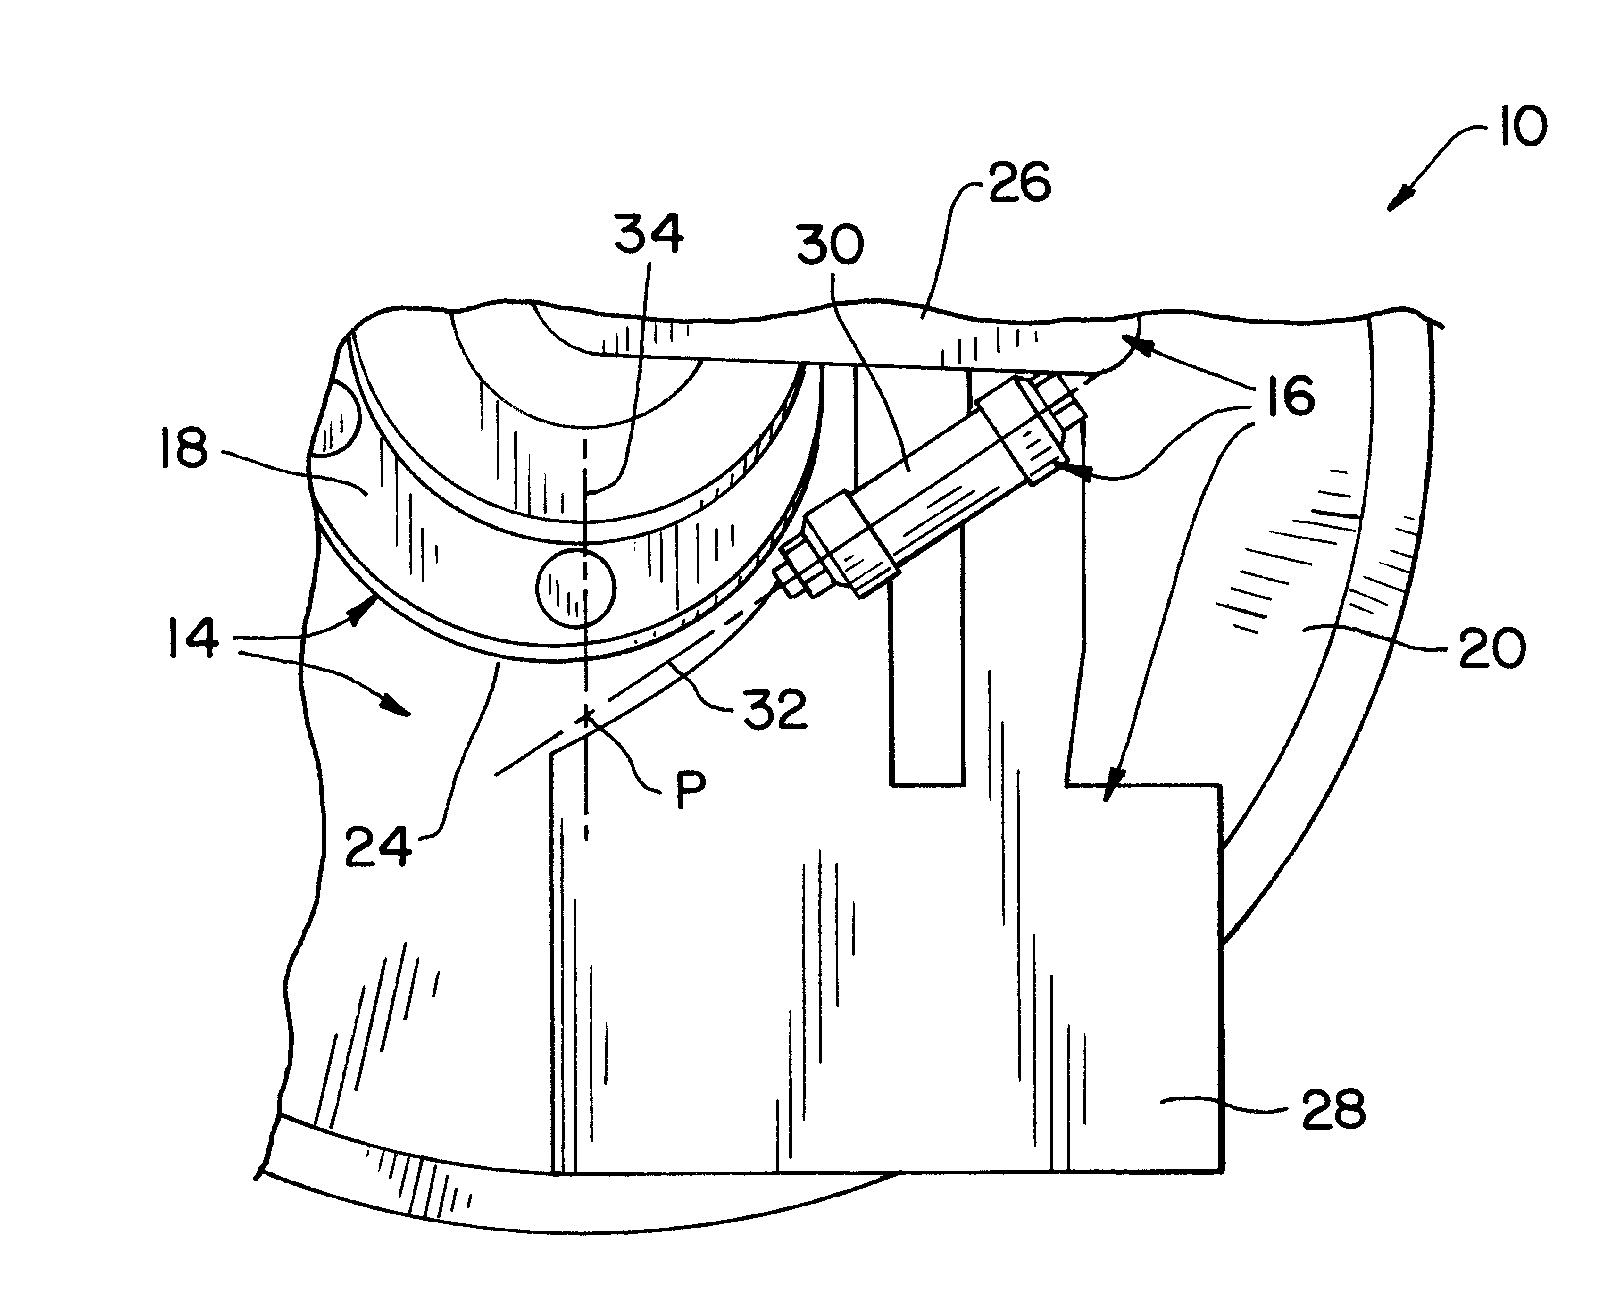 Opener disk blade scraper hinge geometry to maintain contact with deflected disk blade